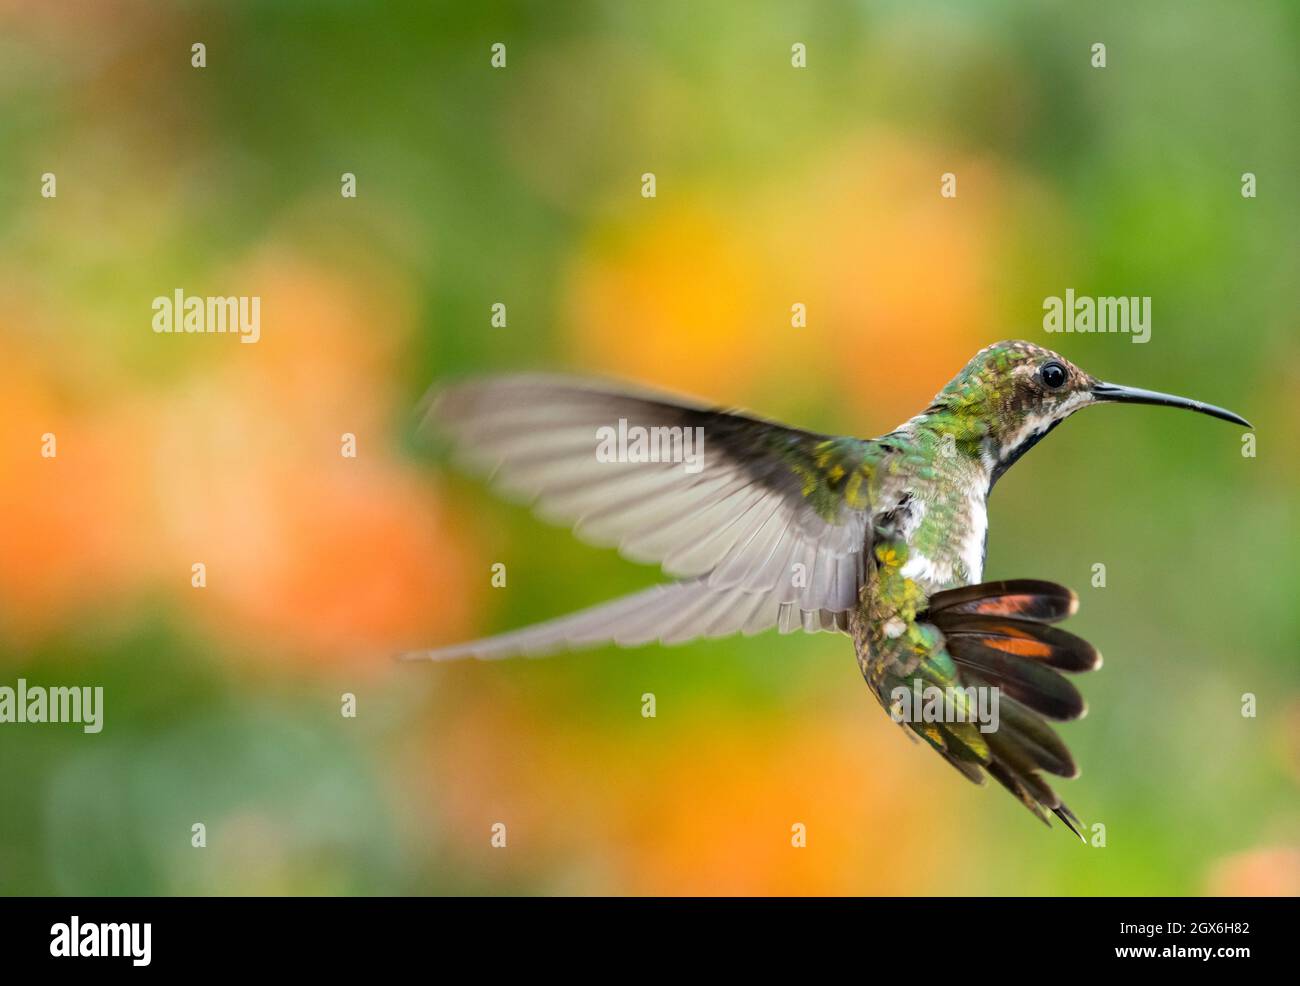 A female Black-throated Mango hummingbird, Anthracothorax Nigricollis, hovering in a unique acrobatic position with a colorful background. Stock Photo